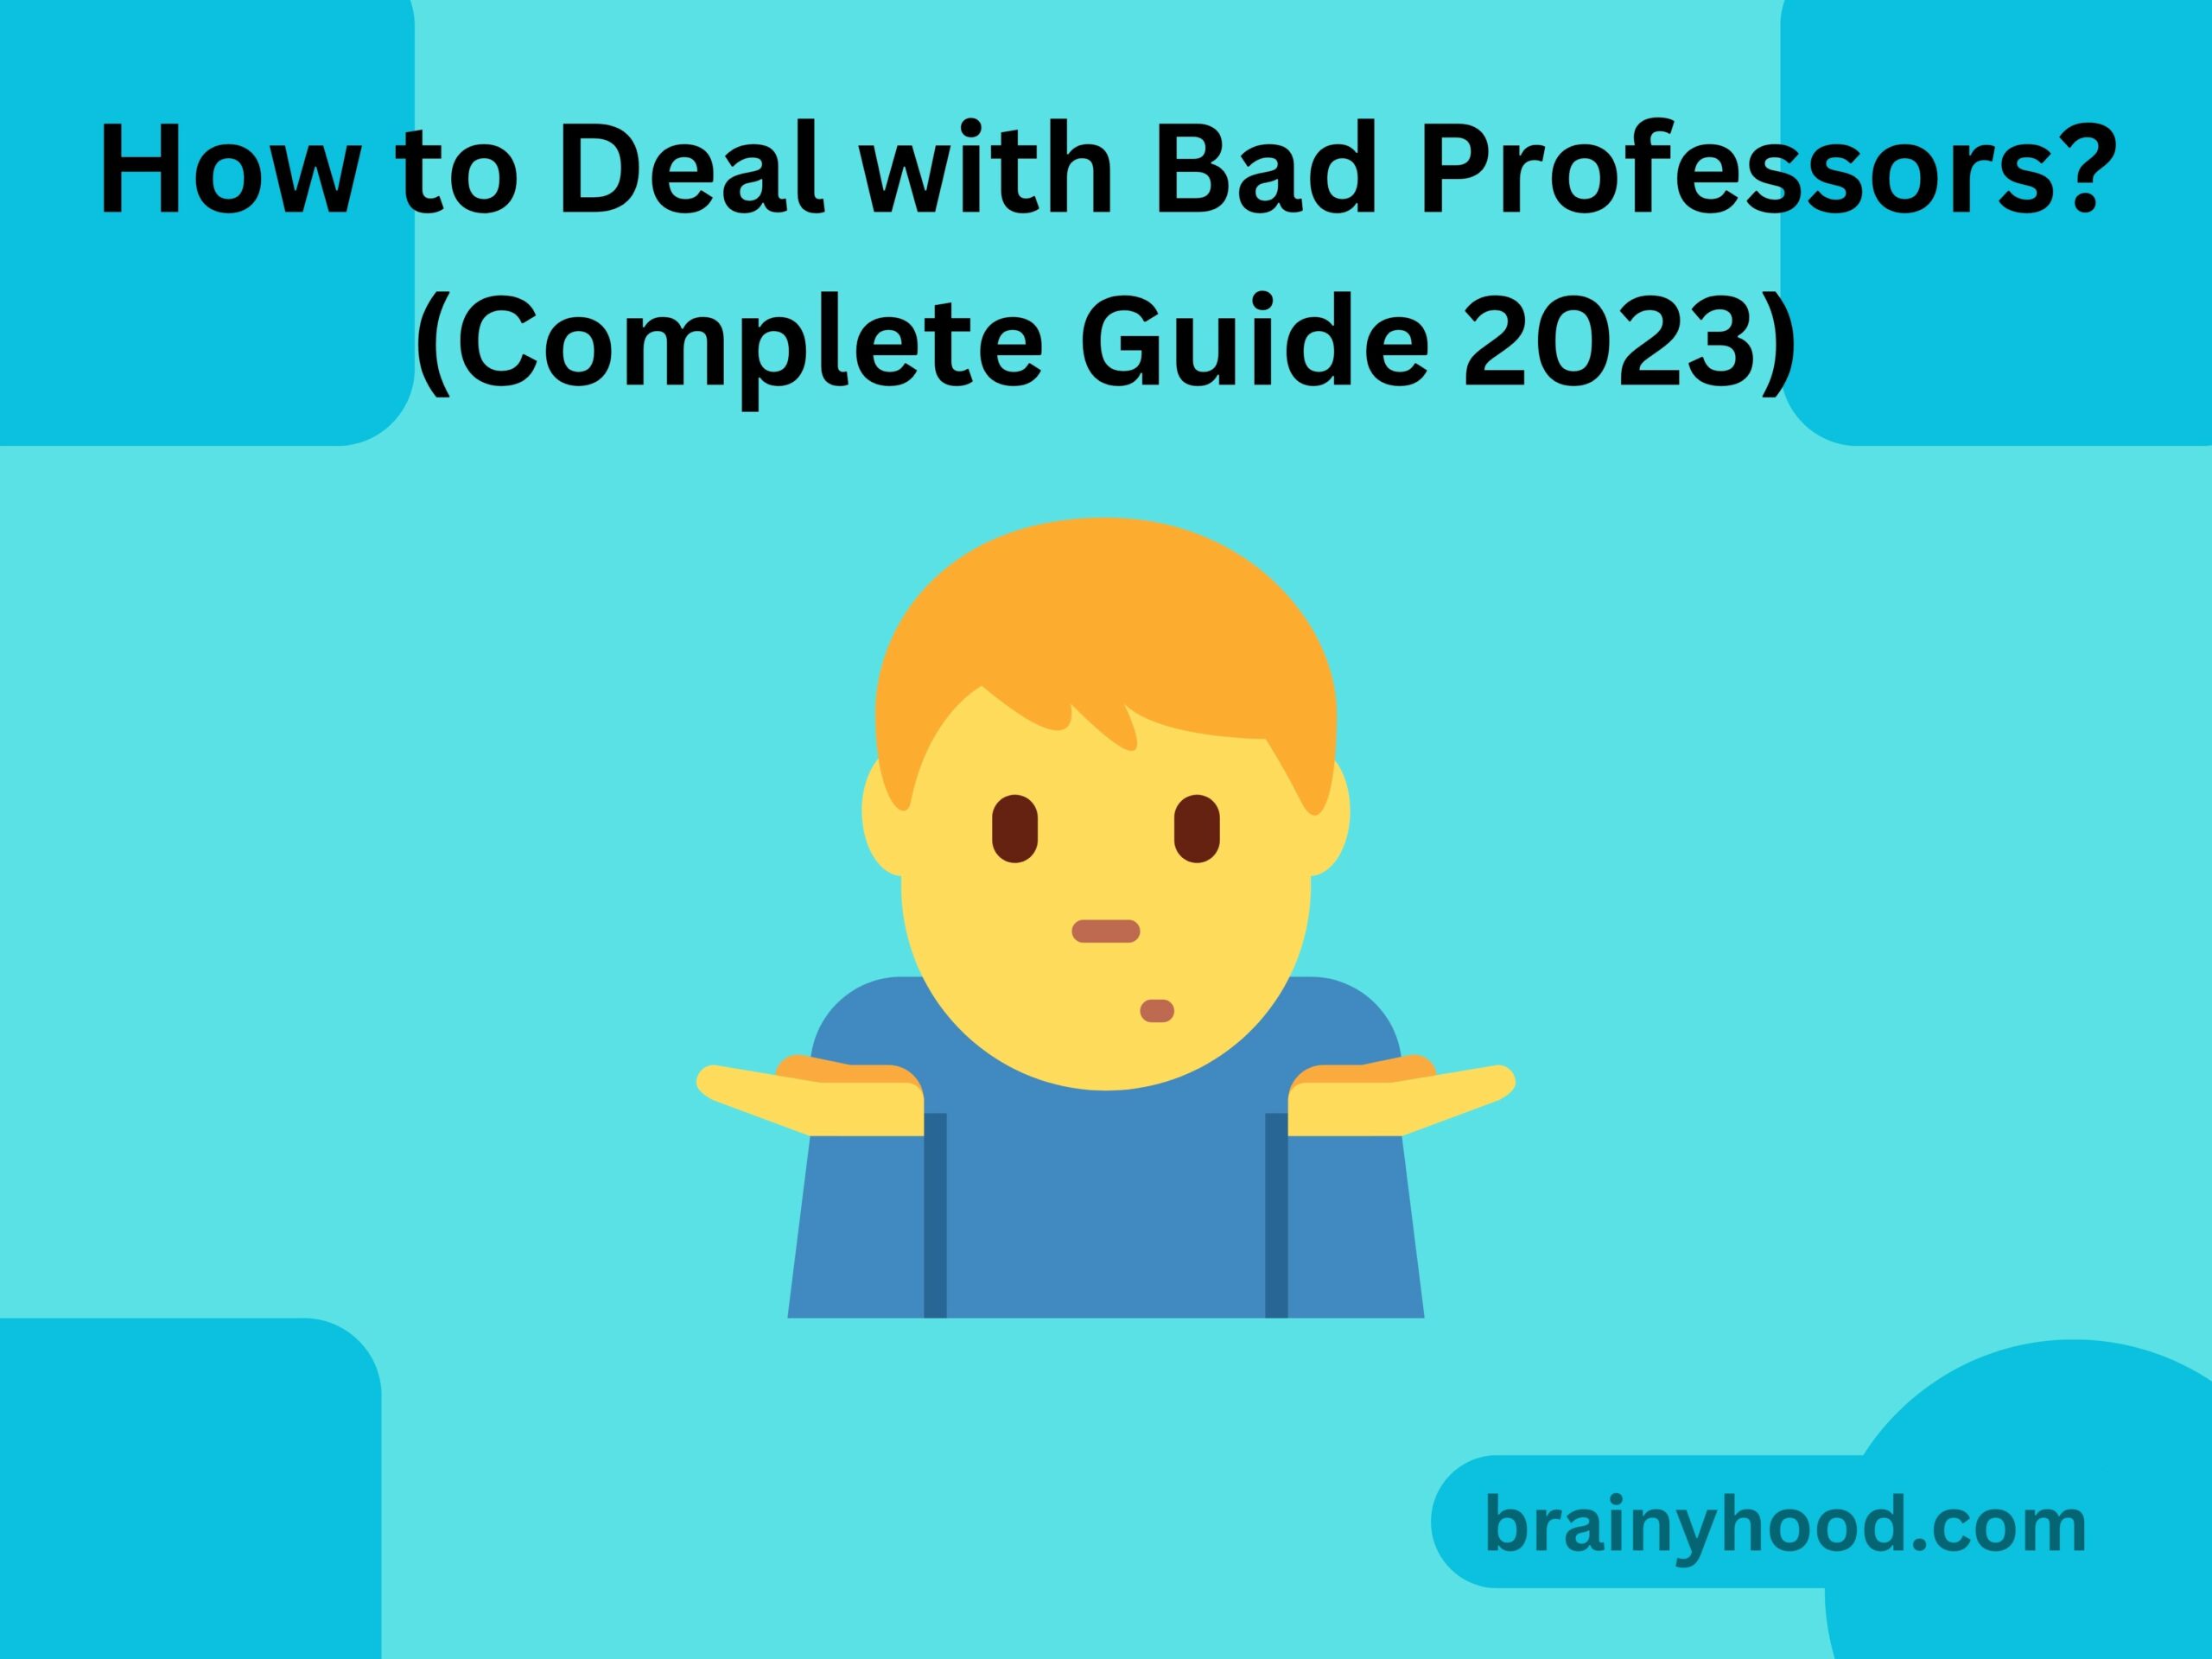 How to Deal with Bad Professors? (Complete Guide 2023)